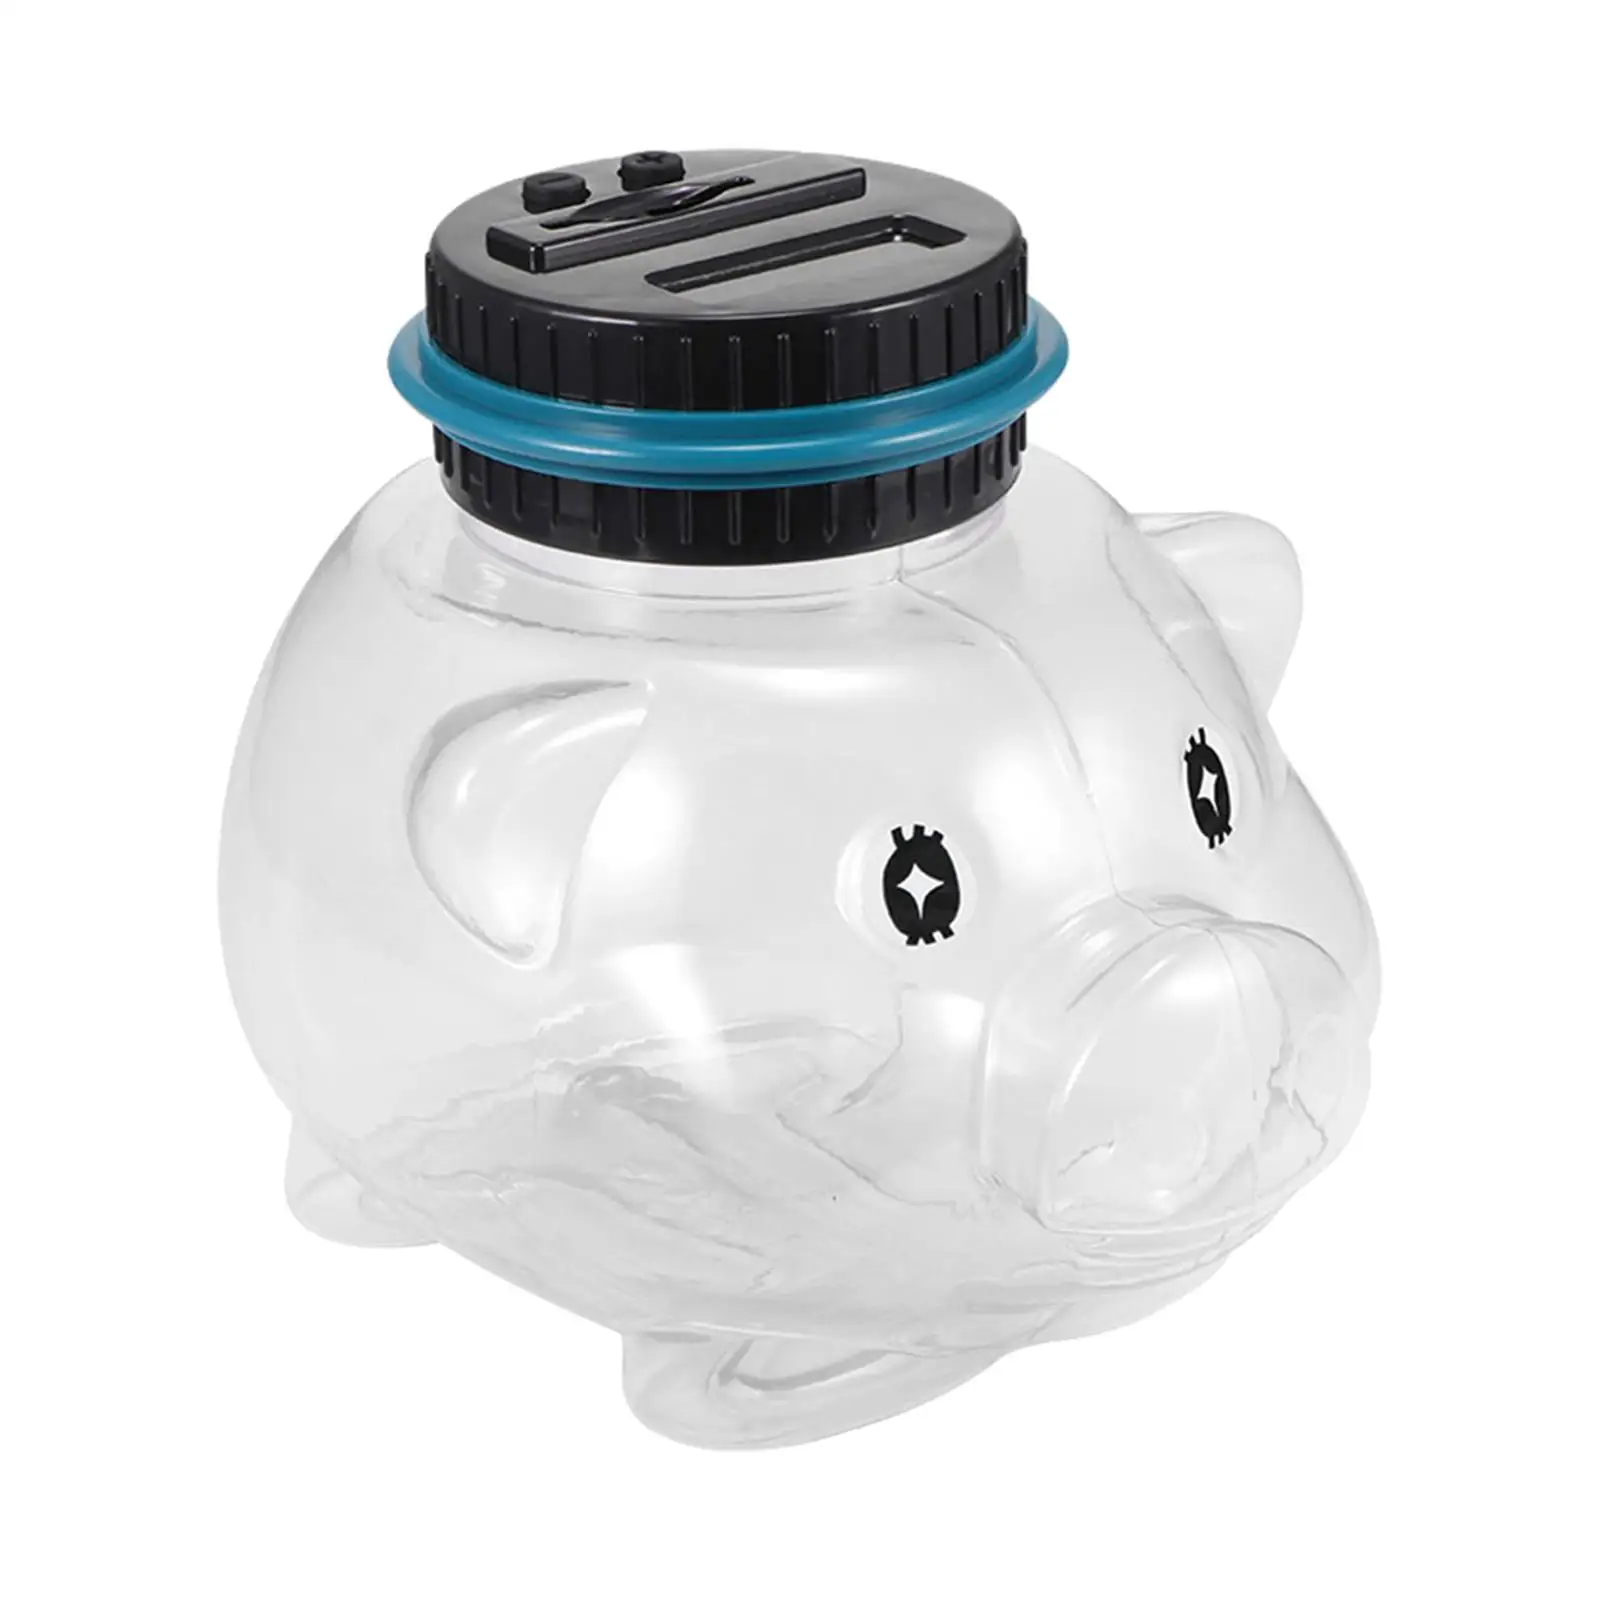 Digital Counting Money Jar Coin Bank Money Jar Transparent Lightweight Digital Coin Counting Bank for Girls Adults Boys Gifts